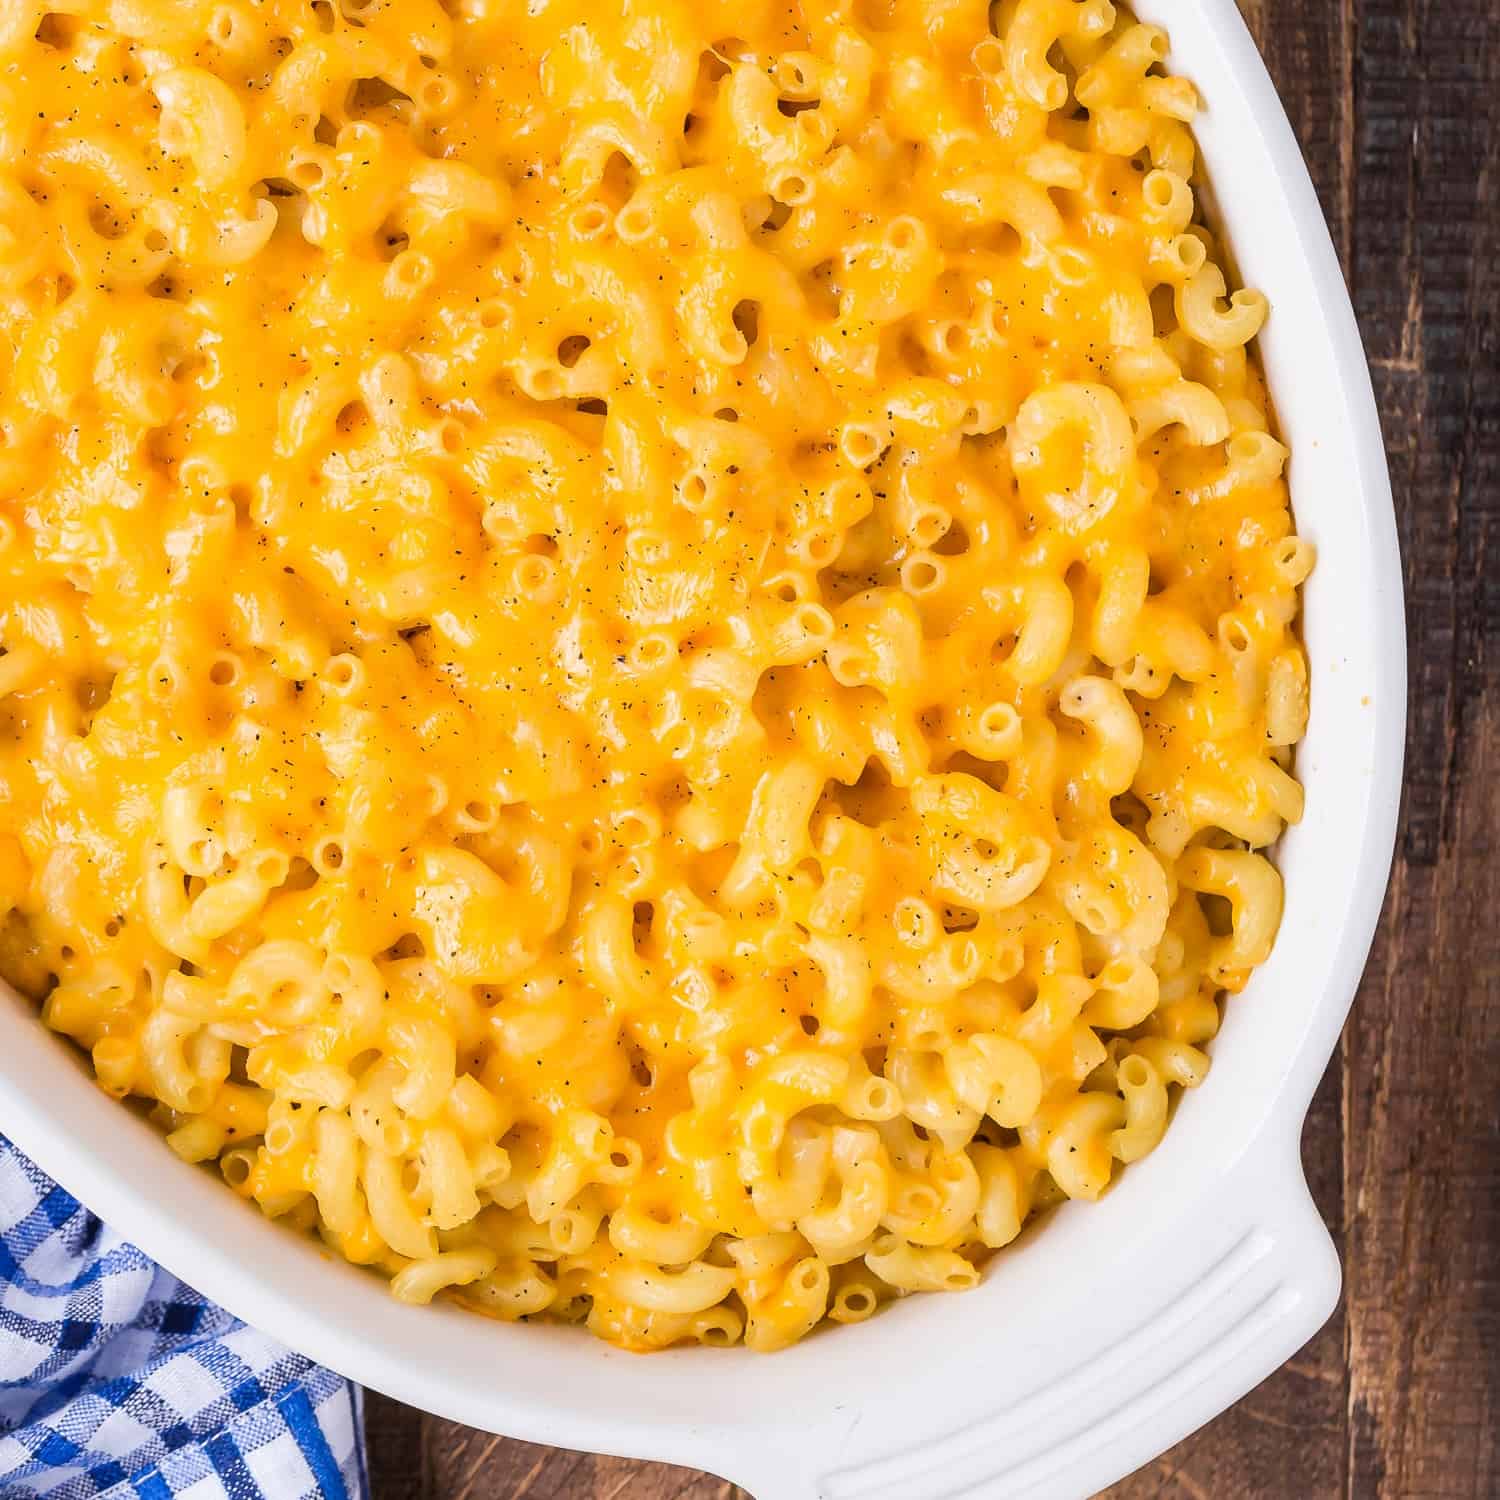 Homemade Mac and Cheese Recipe (with Video)